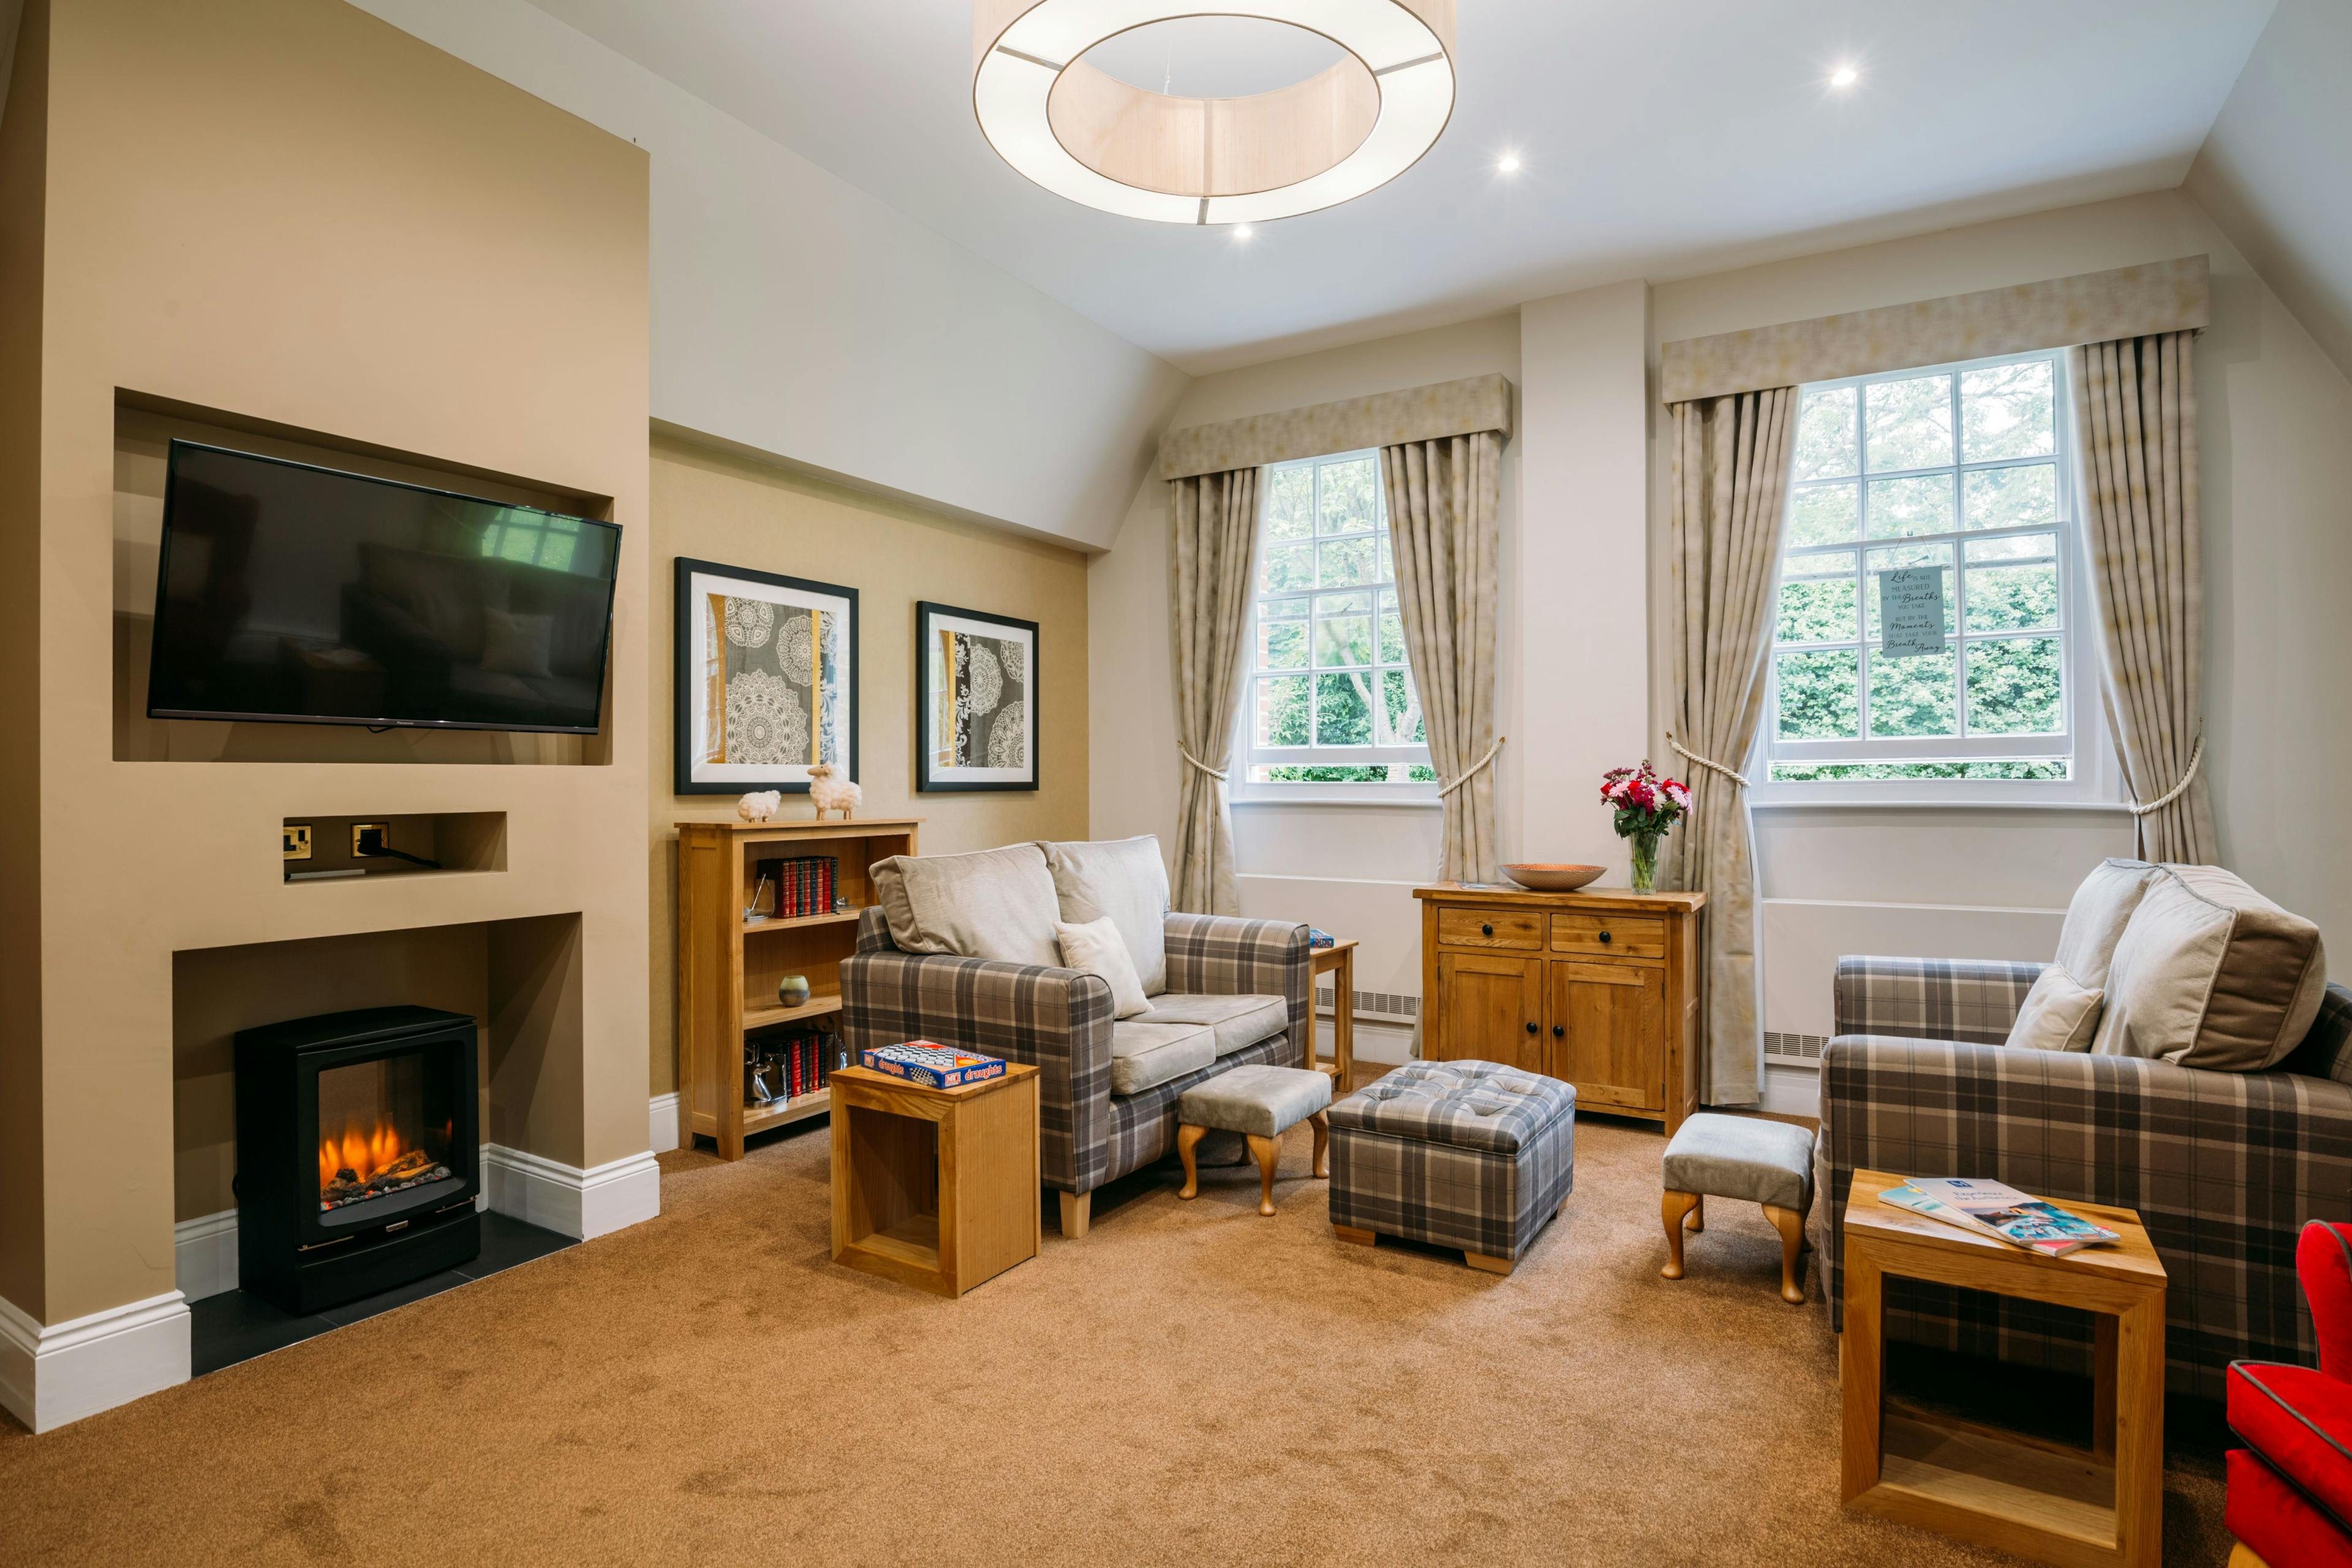 Communal Lounge at St Thomas Care Home in Basingstoke, Hampshire